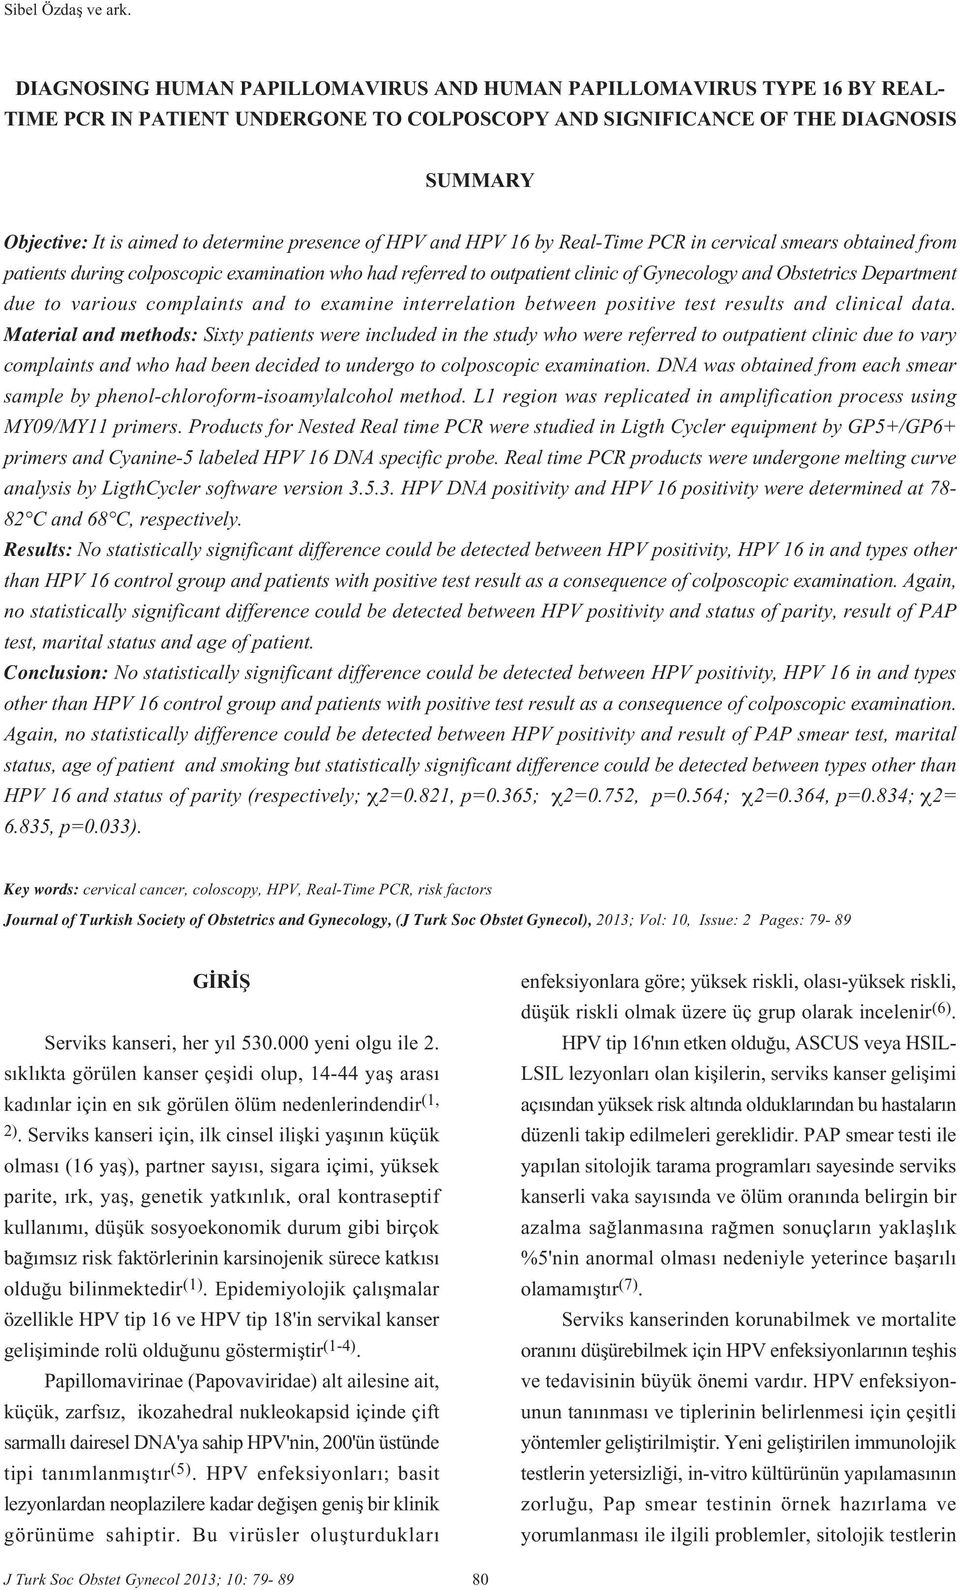 presence of HPV and HPV 16 by Real-Time PCR in cervical smears obtained from patients during colposcopic examination who had referred to outpatient clinic of Gynecology and Obstetrics Department due